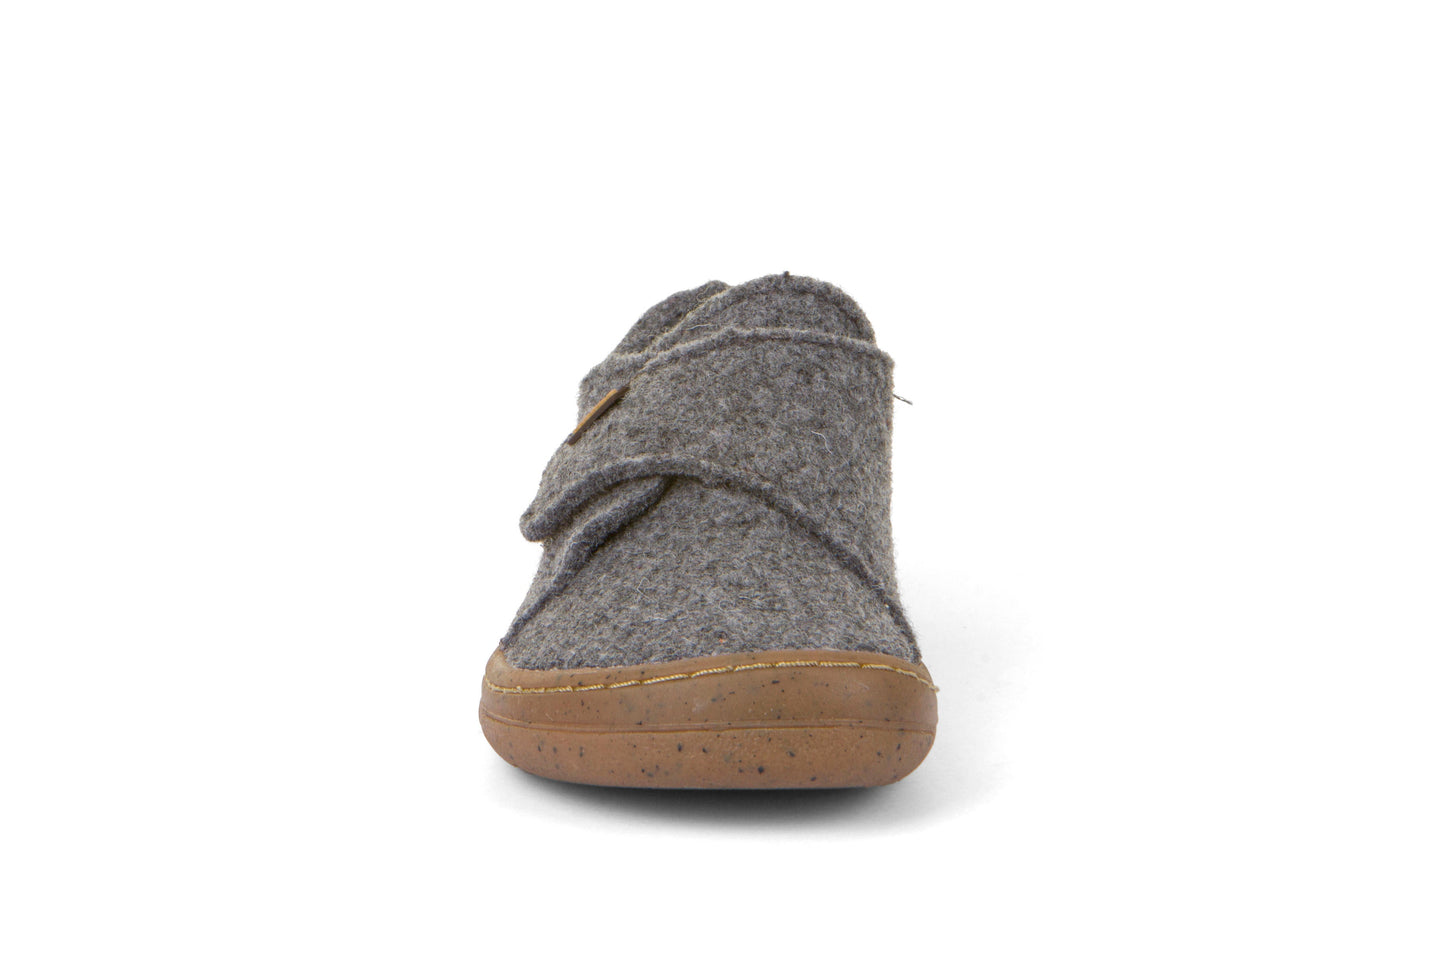 Froddo Barefoot Slippers Grises-Froddo-Cacles Barefoot